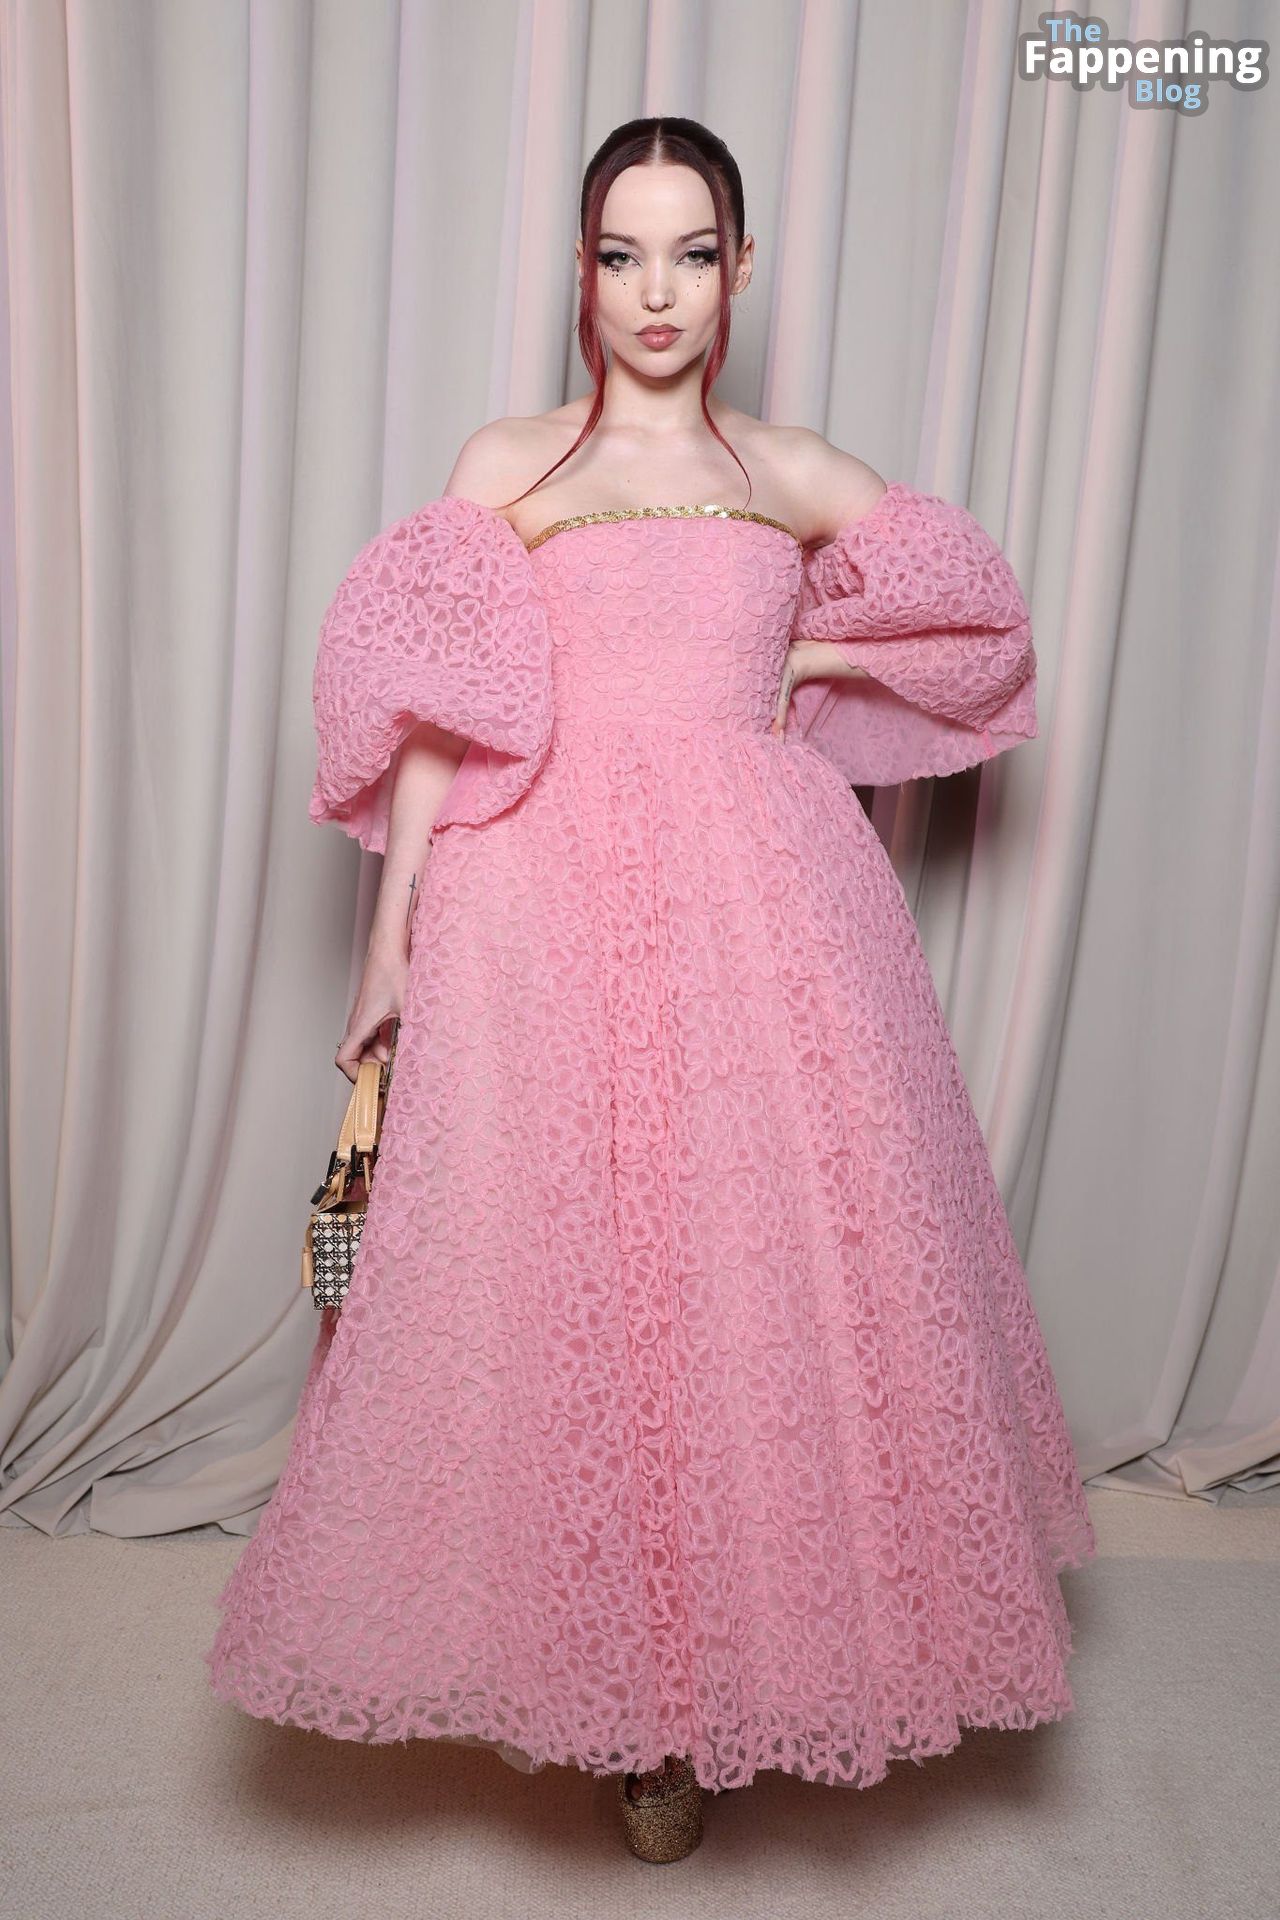 Dove Cameron Looks Beautiful in a Pink Dress at the Giambattista Valli Fashion Show in Paris (19 Photos)